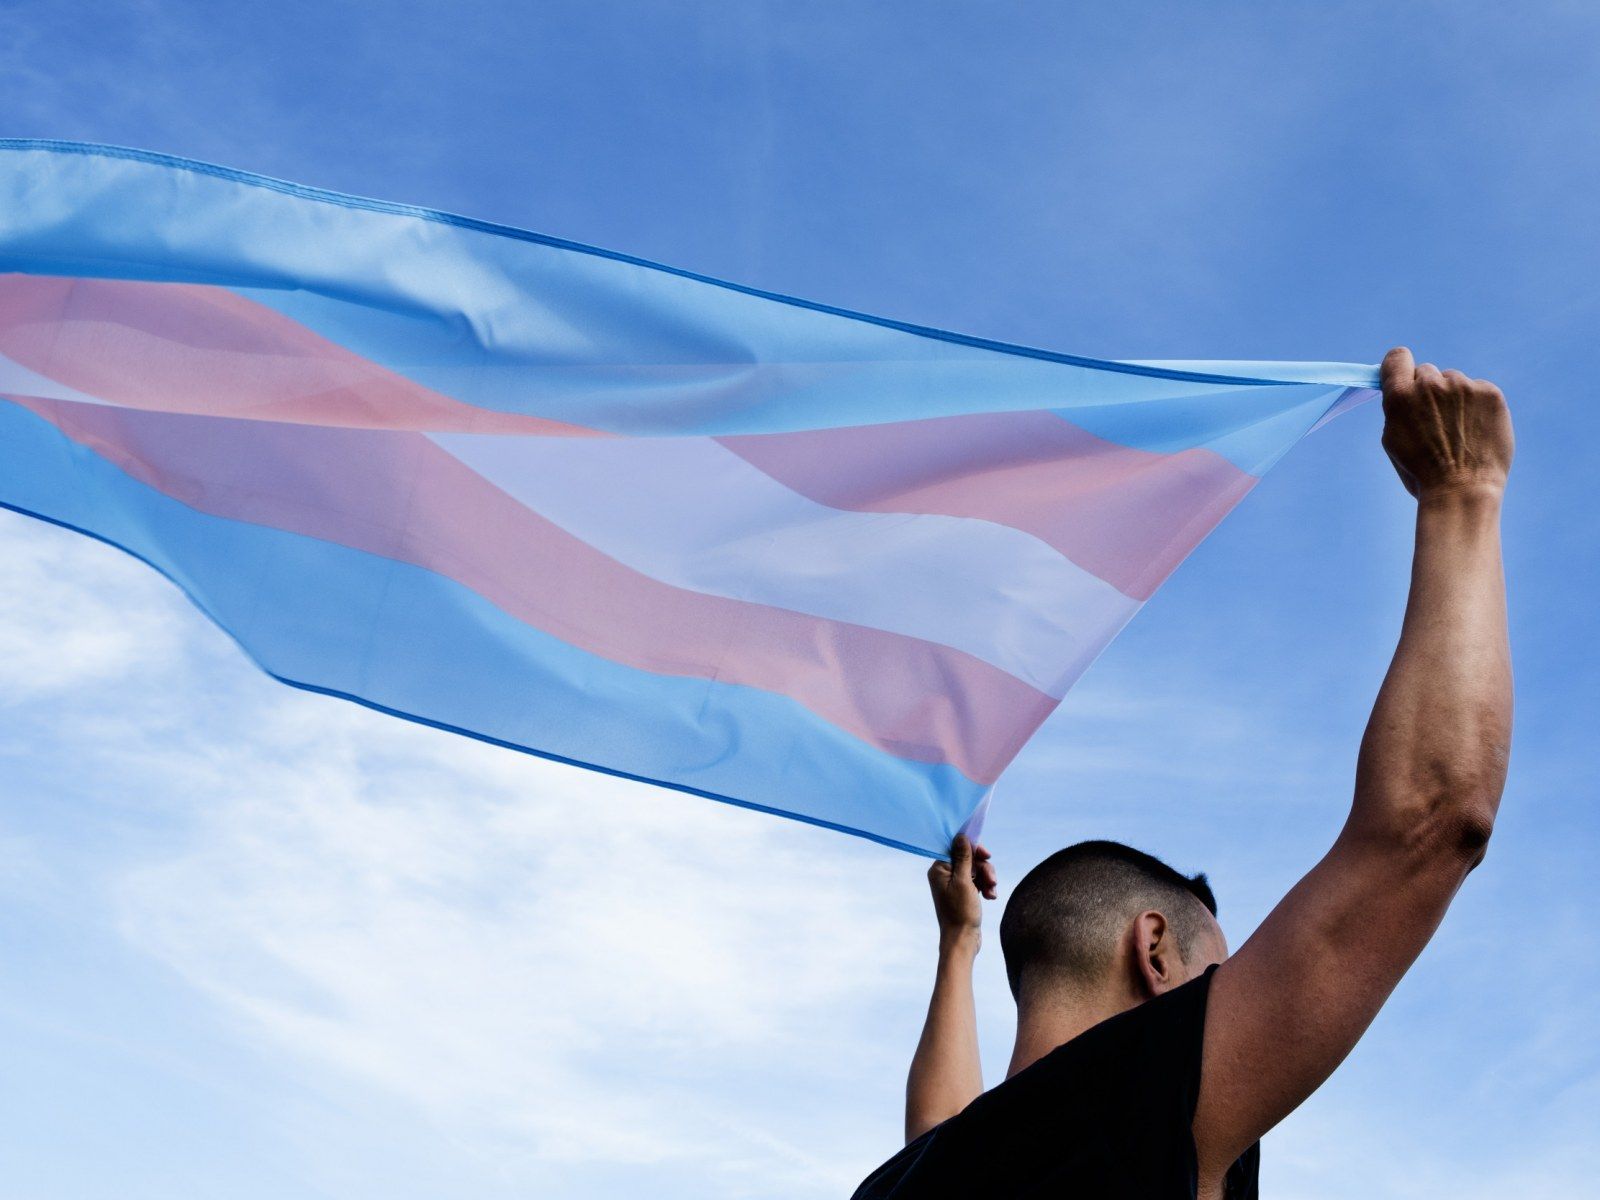 Transgender People Who Have Gender Affirming Surgery Less Likely To Need Mental Health Treatment